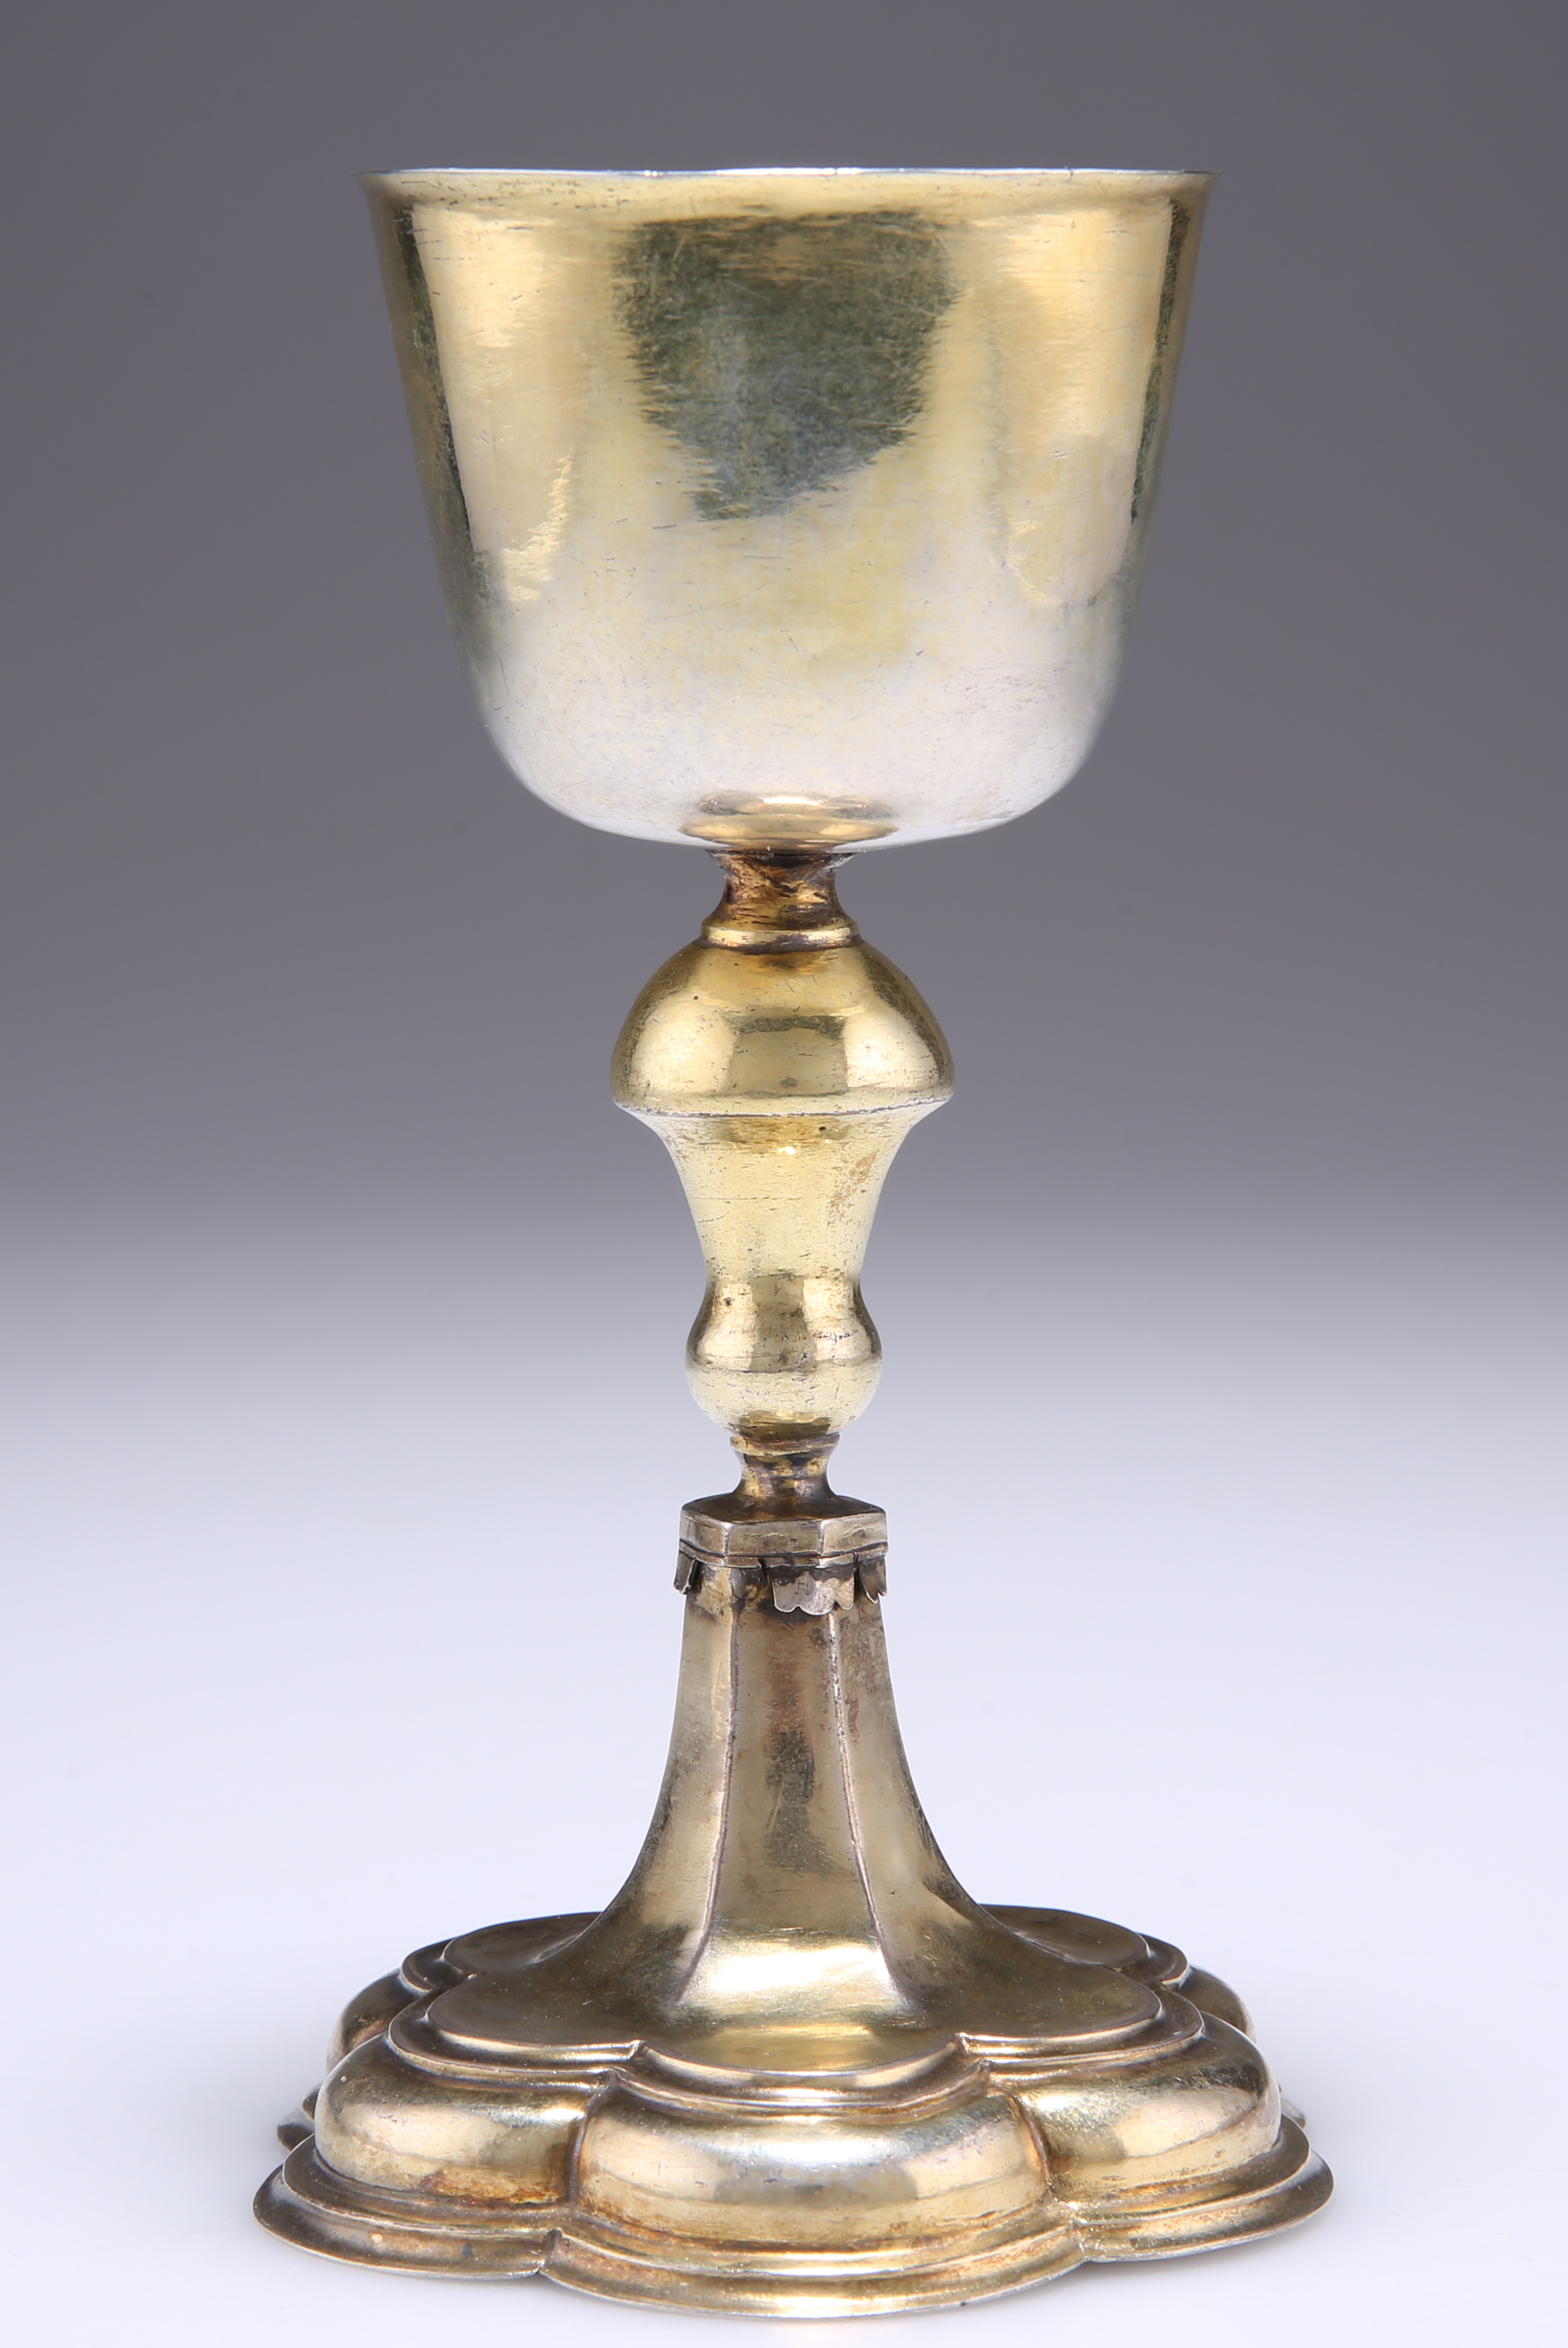 A GERMAN SILVER-GILT TRAVELLING CHALICE